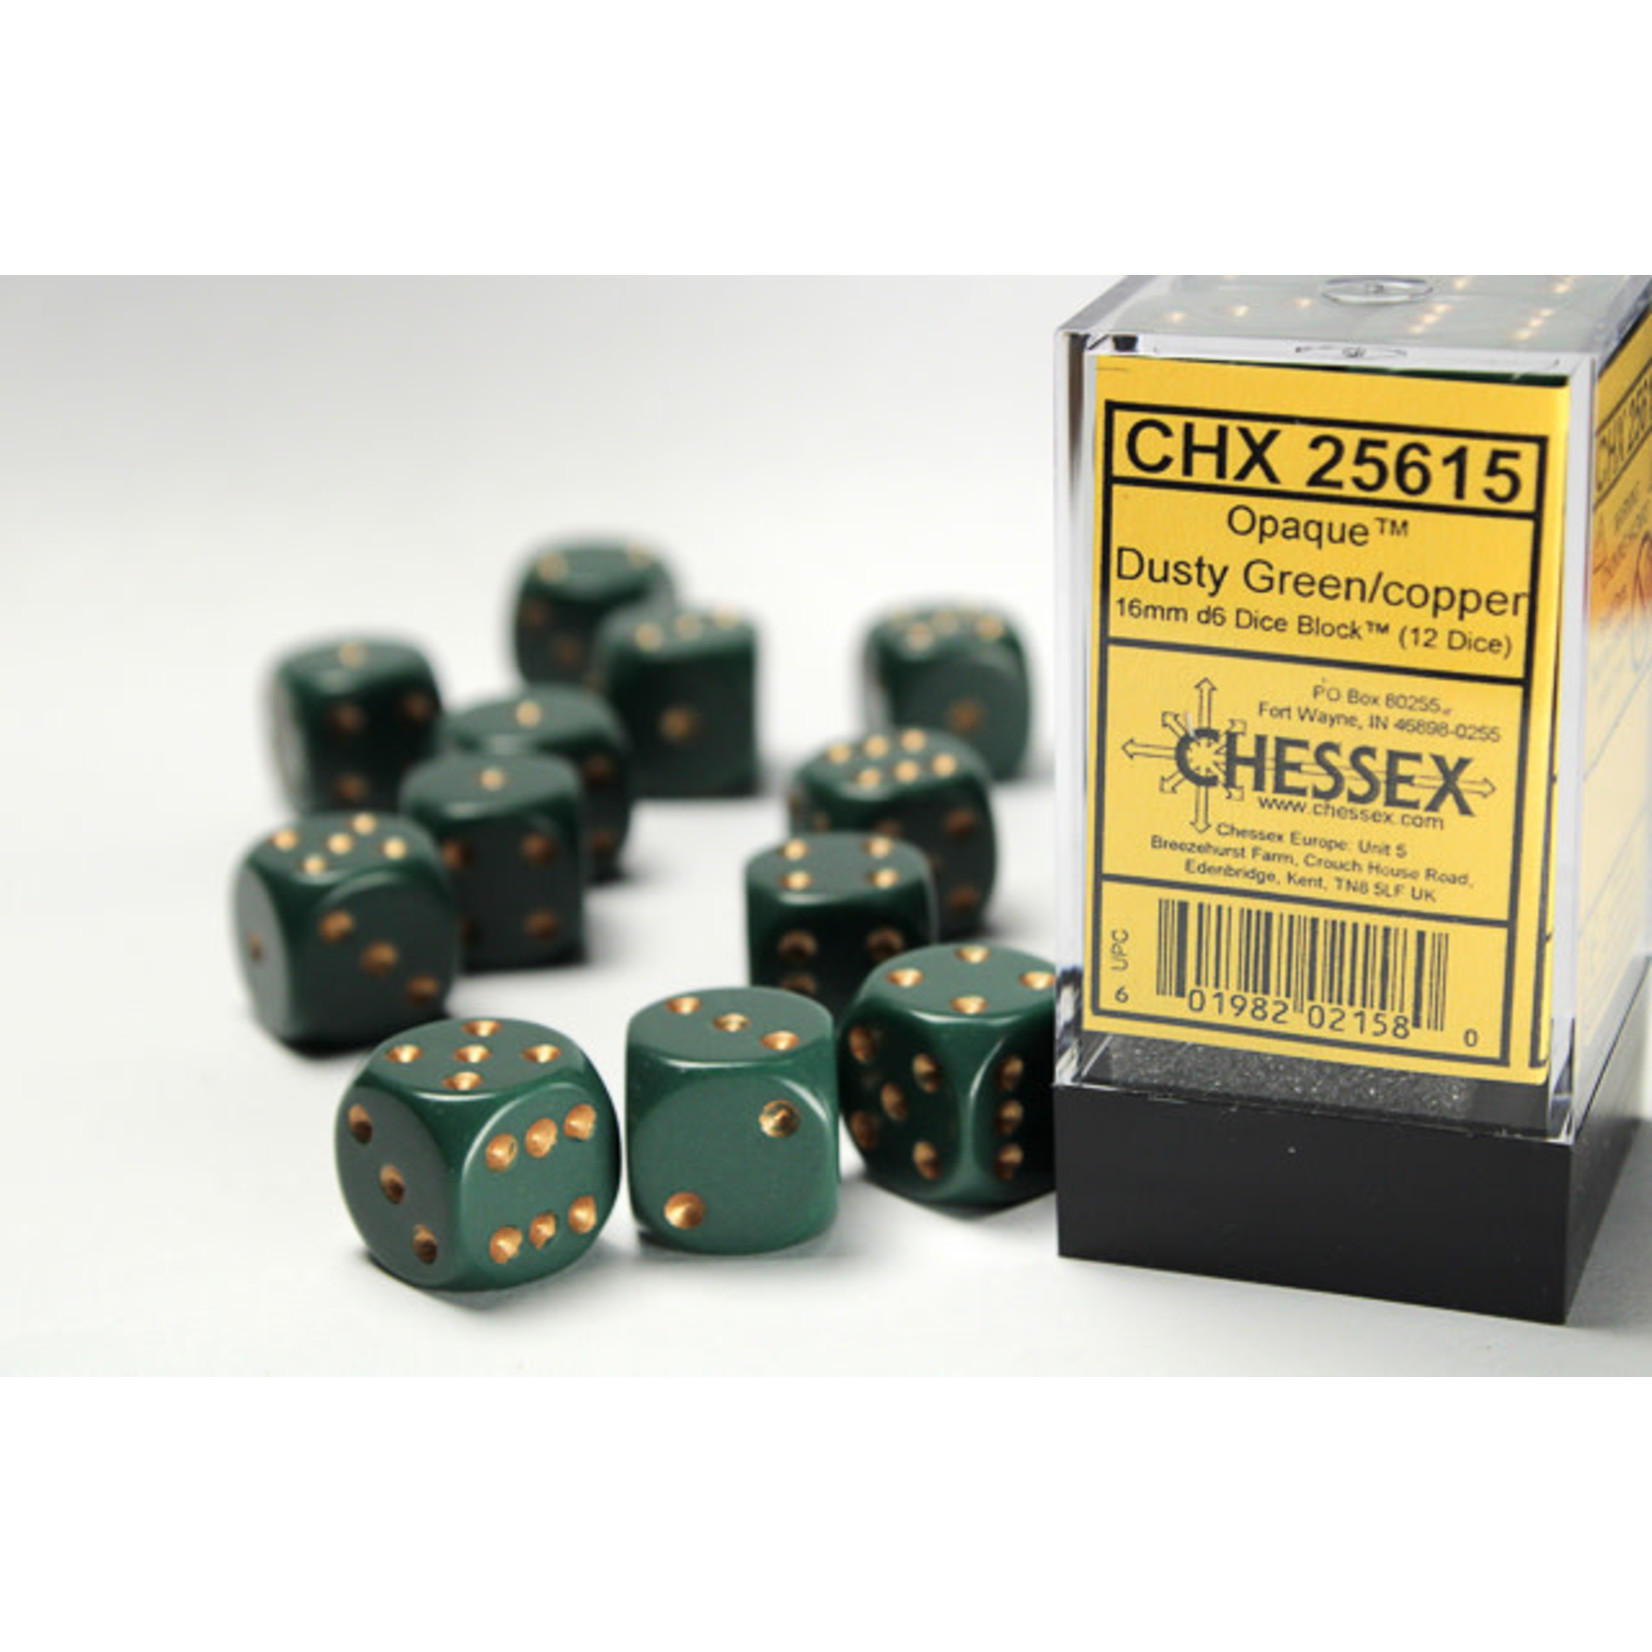 Chessex Dice 16mm 25615 12pc Opaque Dusty Green/Copper